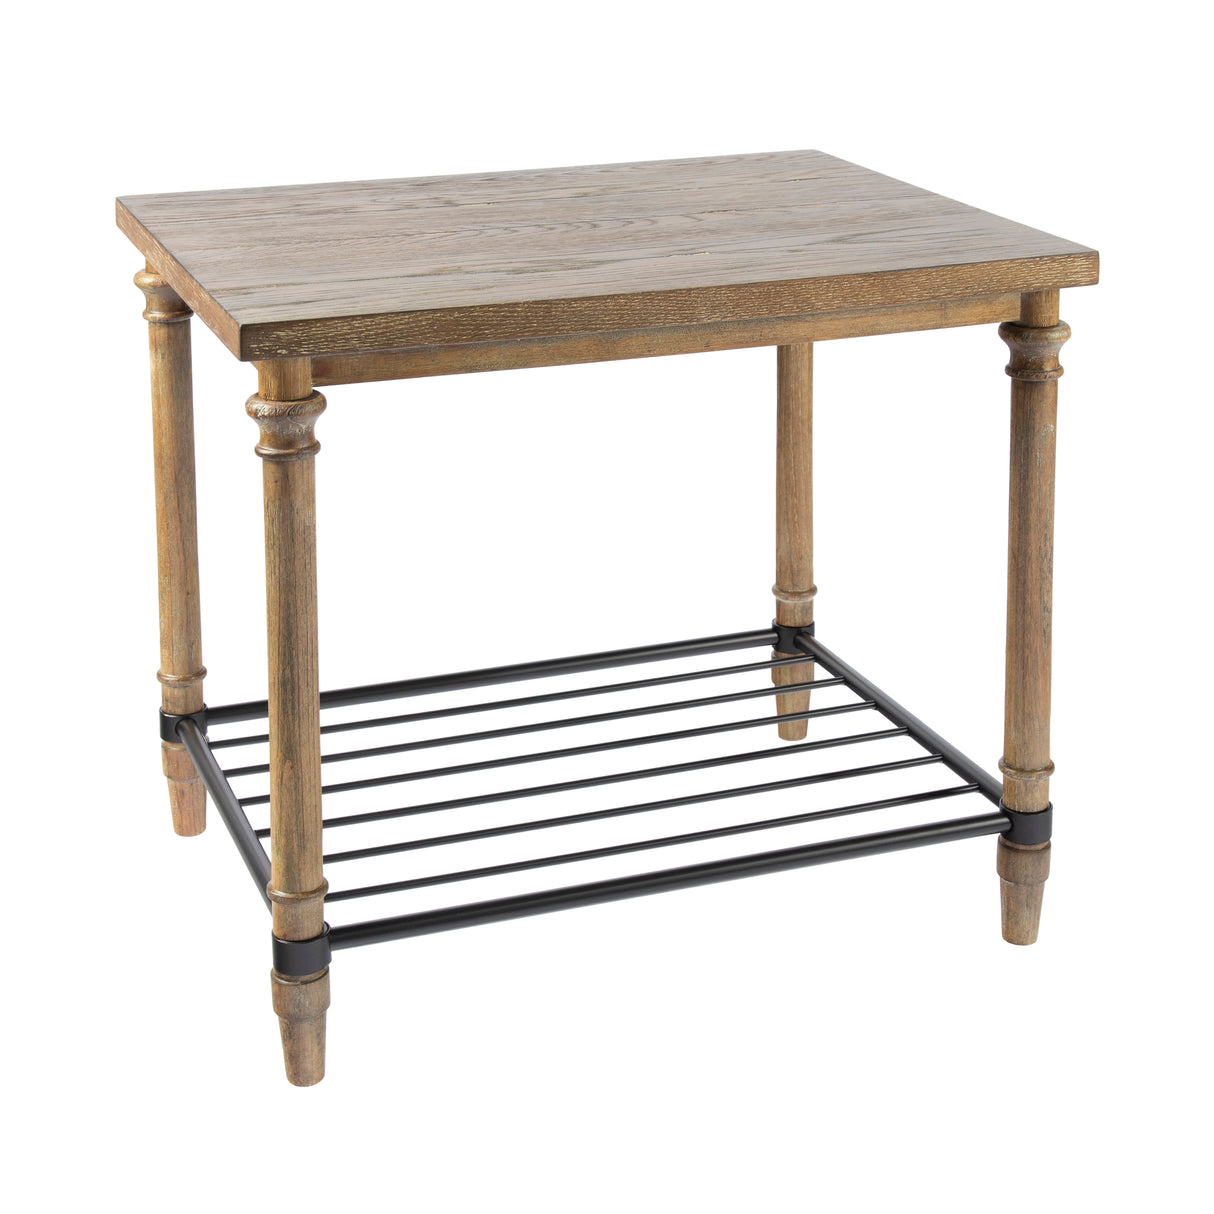 Elk 571-021 Beacon Hill Accent Table - Natural